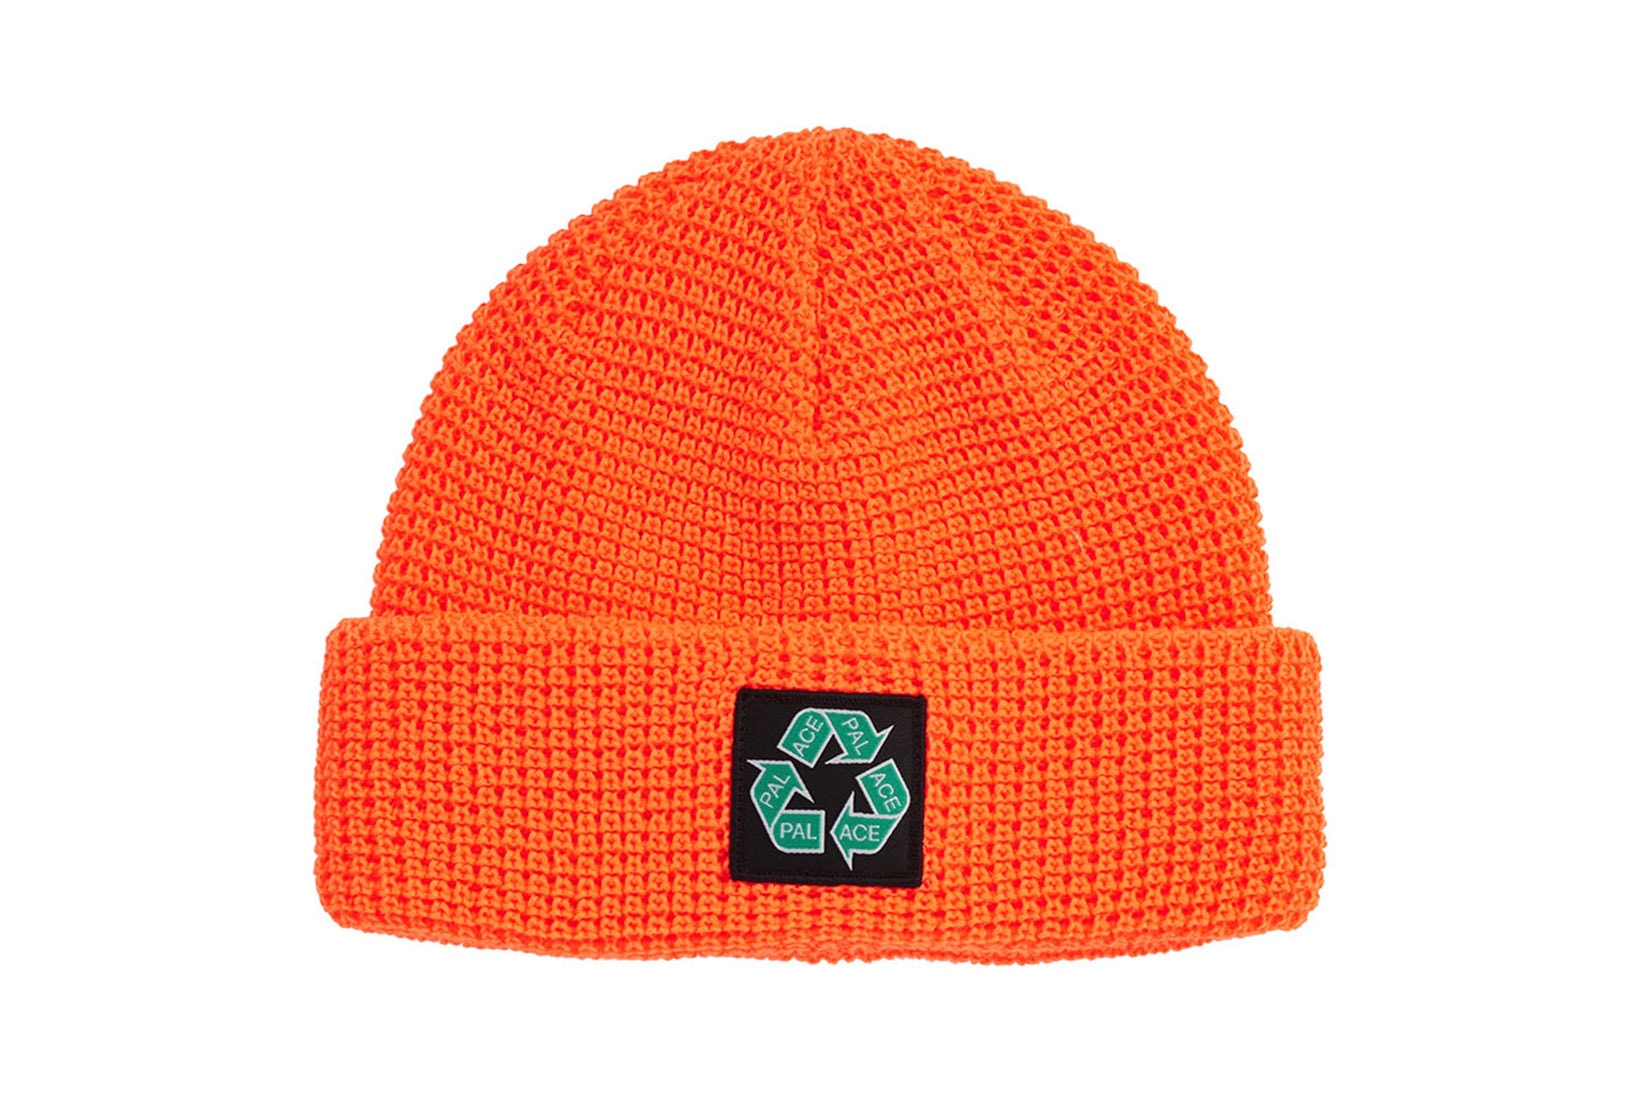 palace spring drop 4 collection logo beanie hat recycle orange